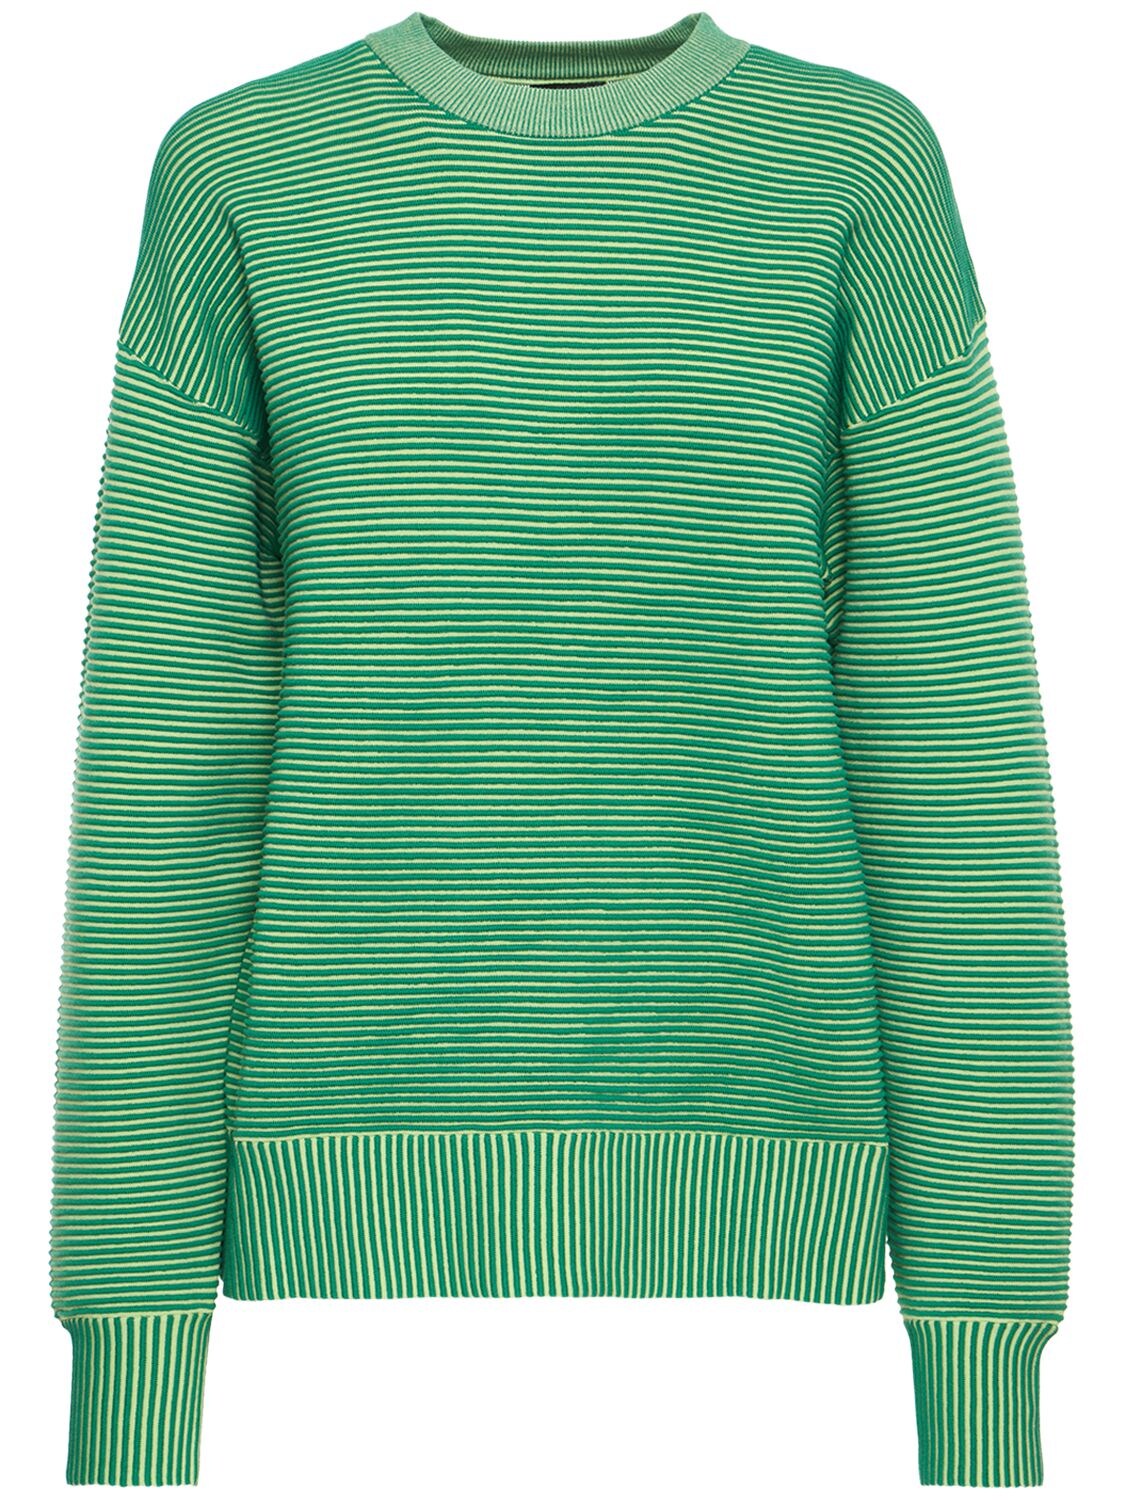 Nagnata Sonny Cotton Knit Sweater In Green